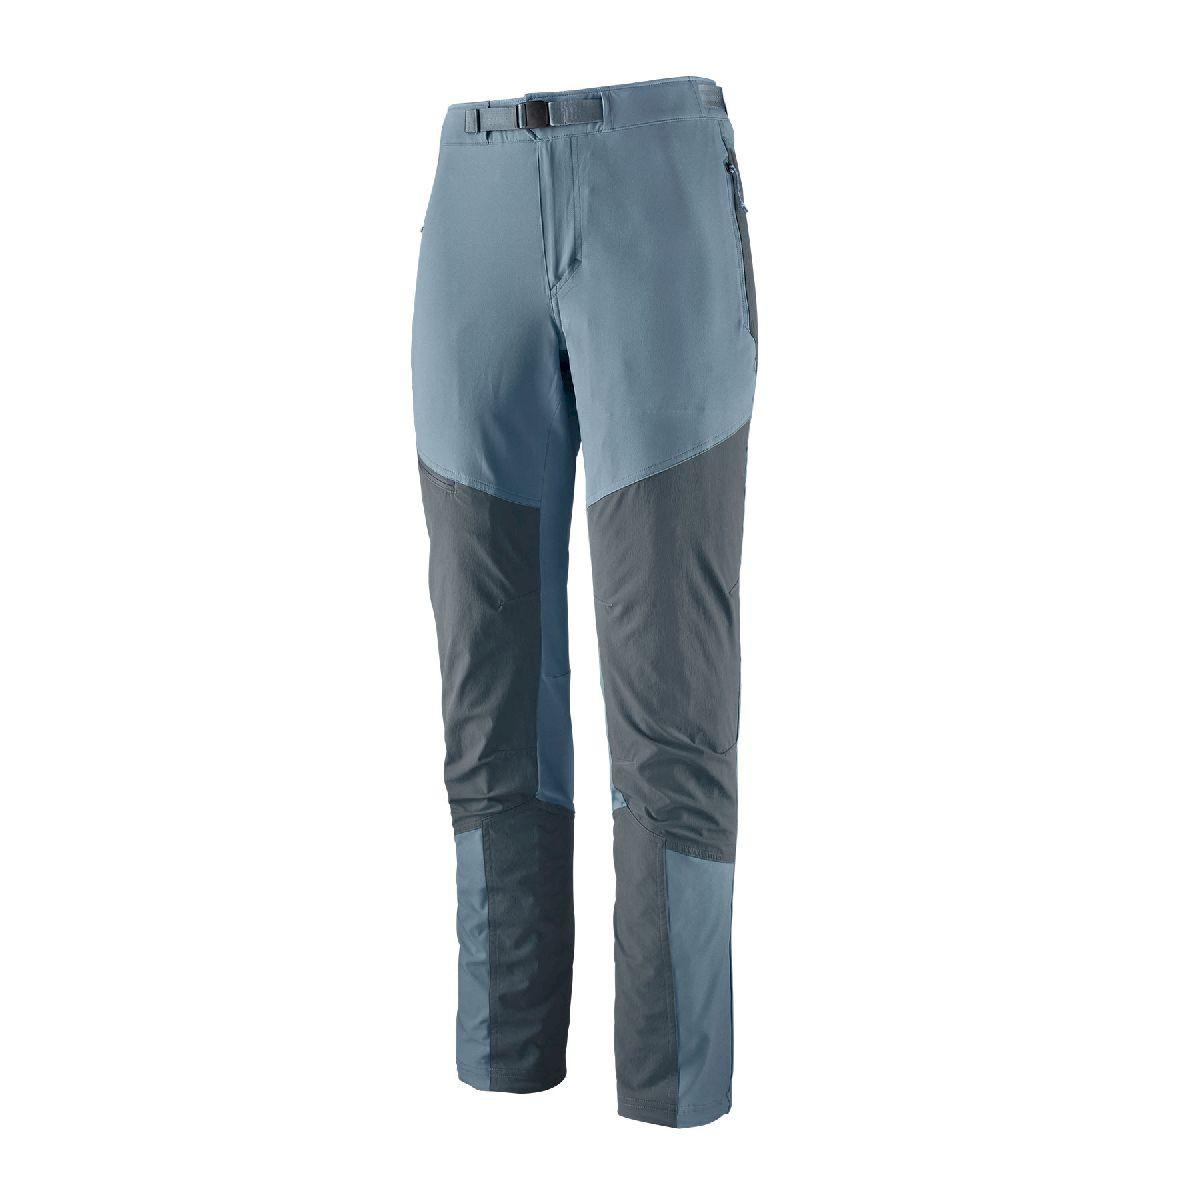 Trousers | Decathlon M Waterproof Over Trousers | Forclaz